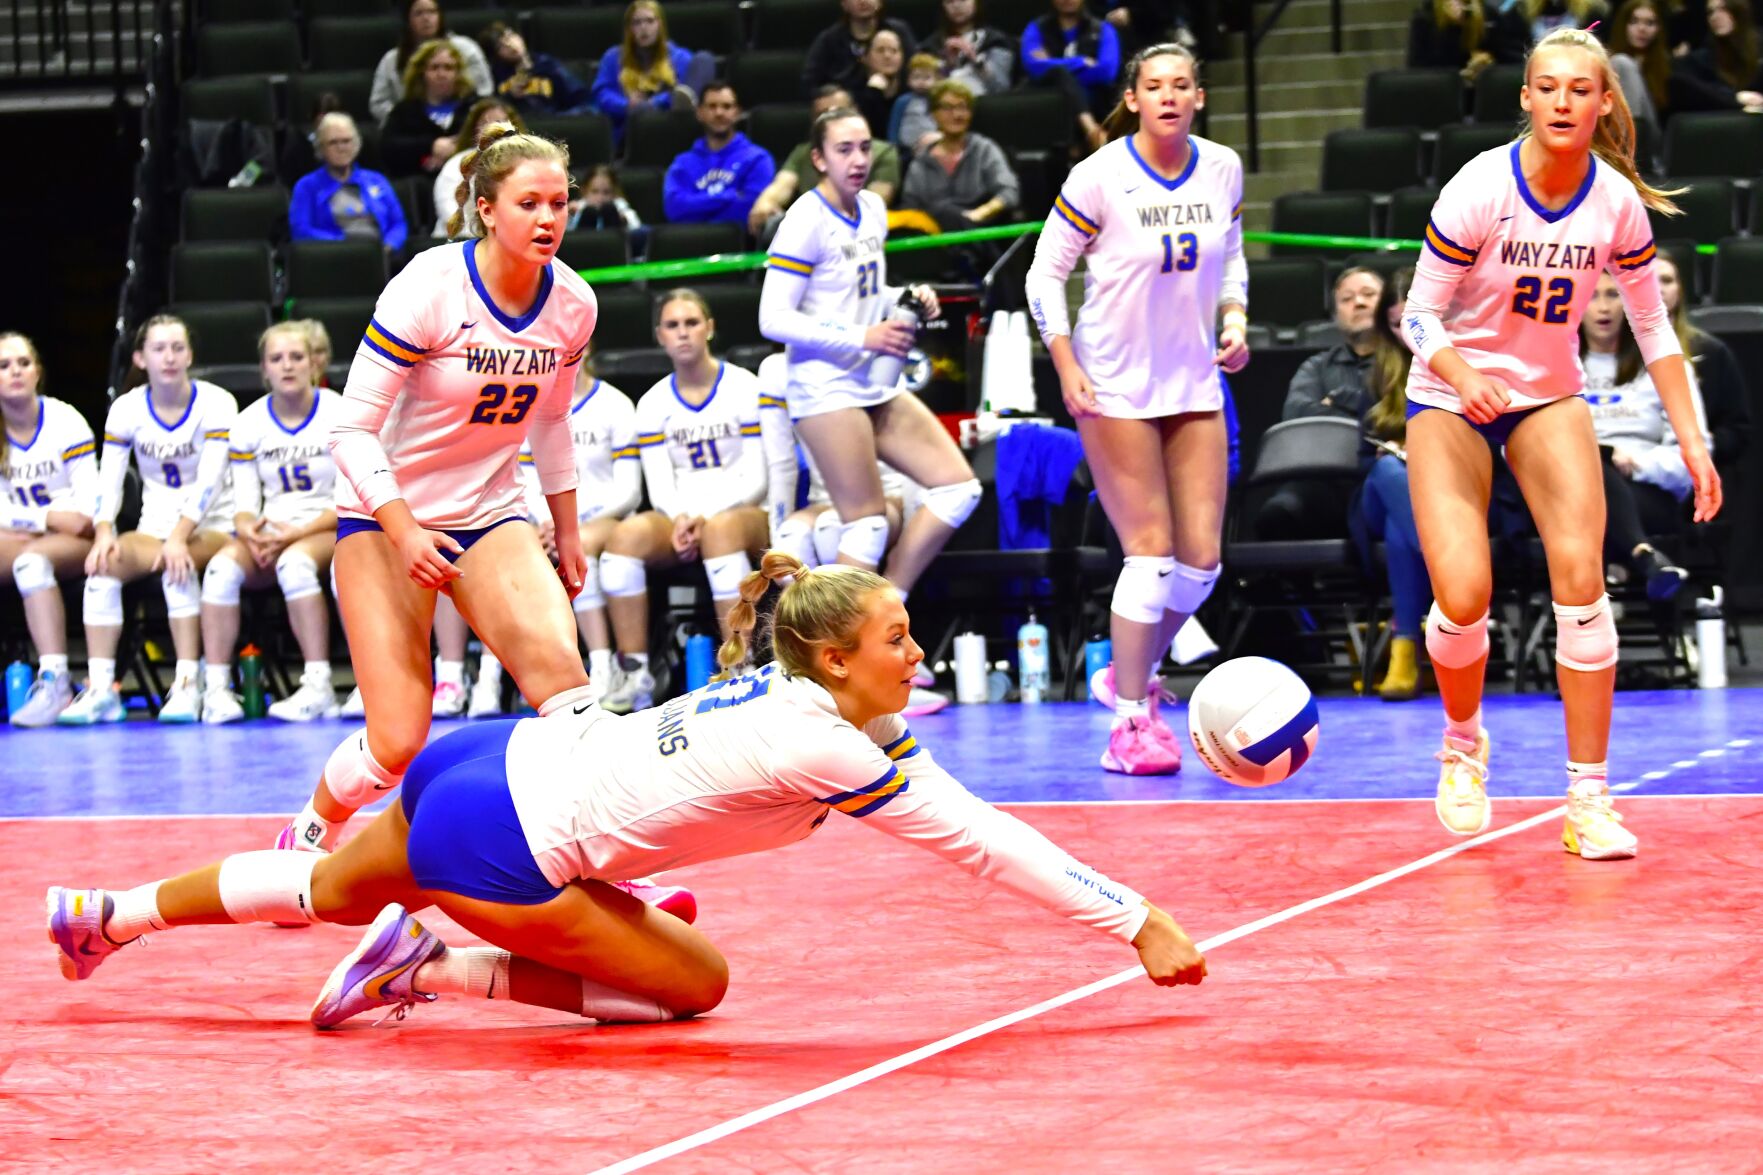 Wayzata moves on in state volleyball, Edina and Tonka in consolation play